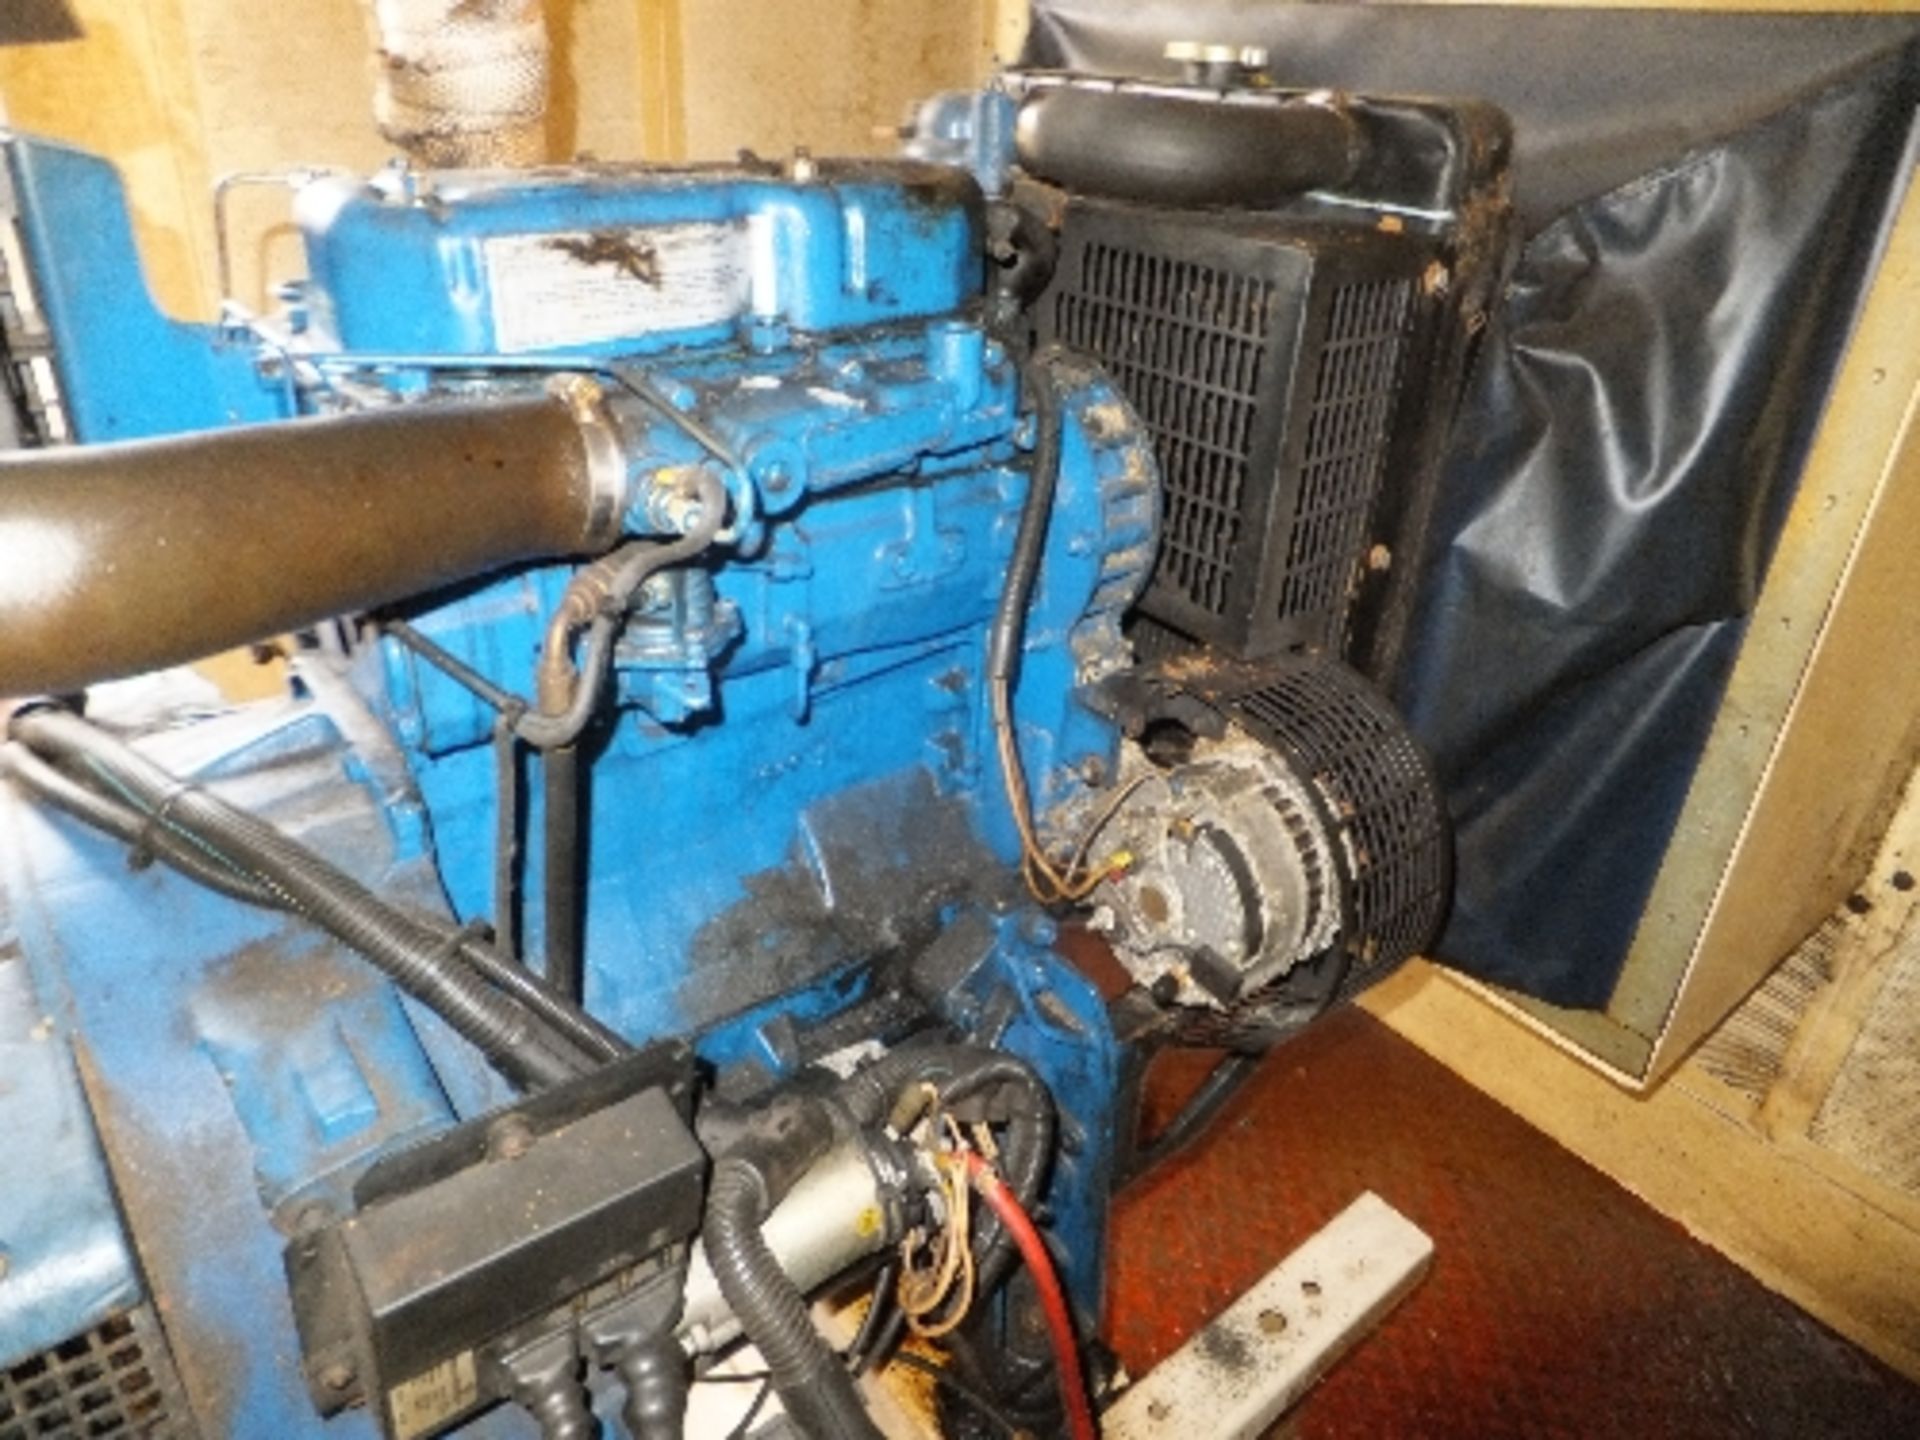 FG Wilson 27kva generator in secure container Engine turns over, no starter - Image 5 of 6